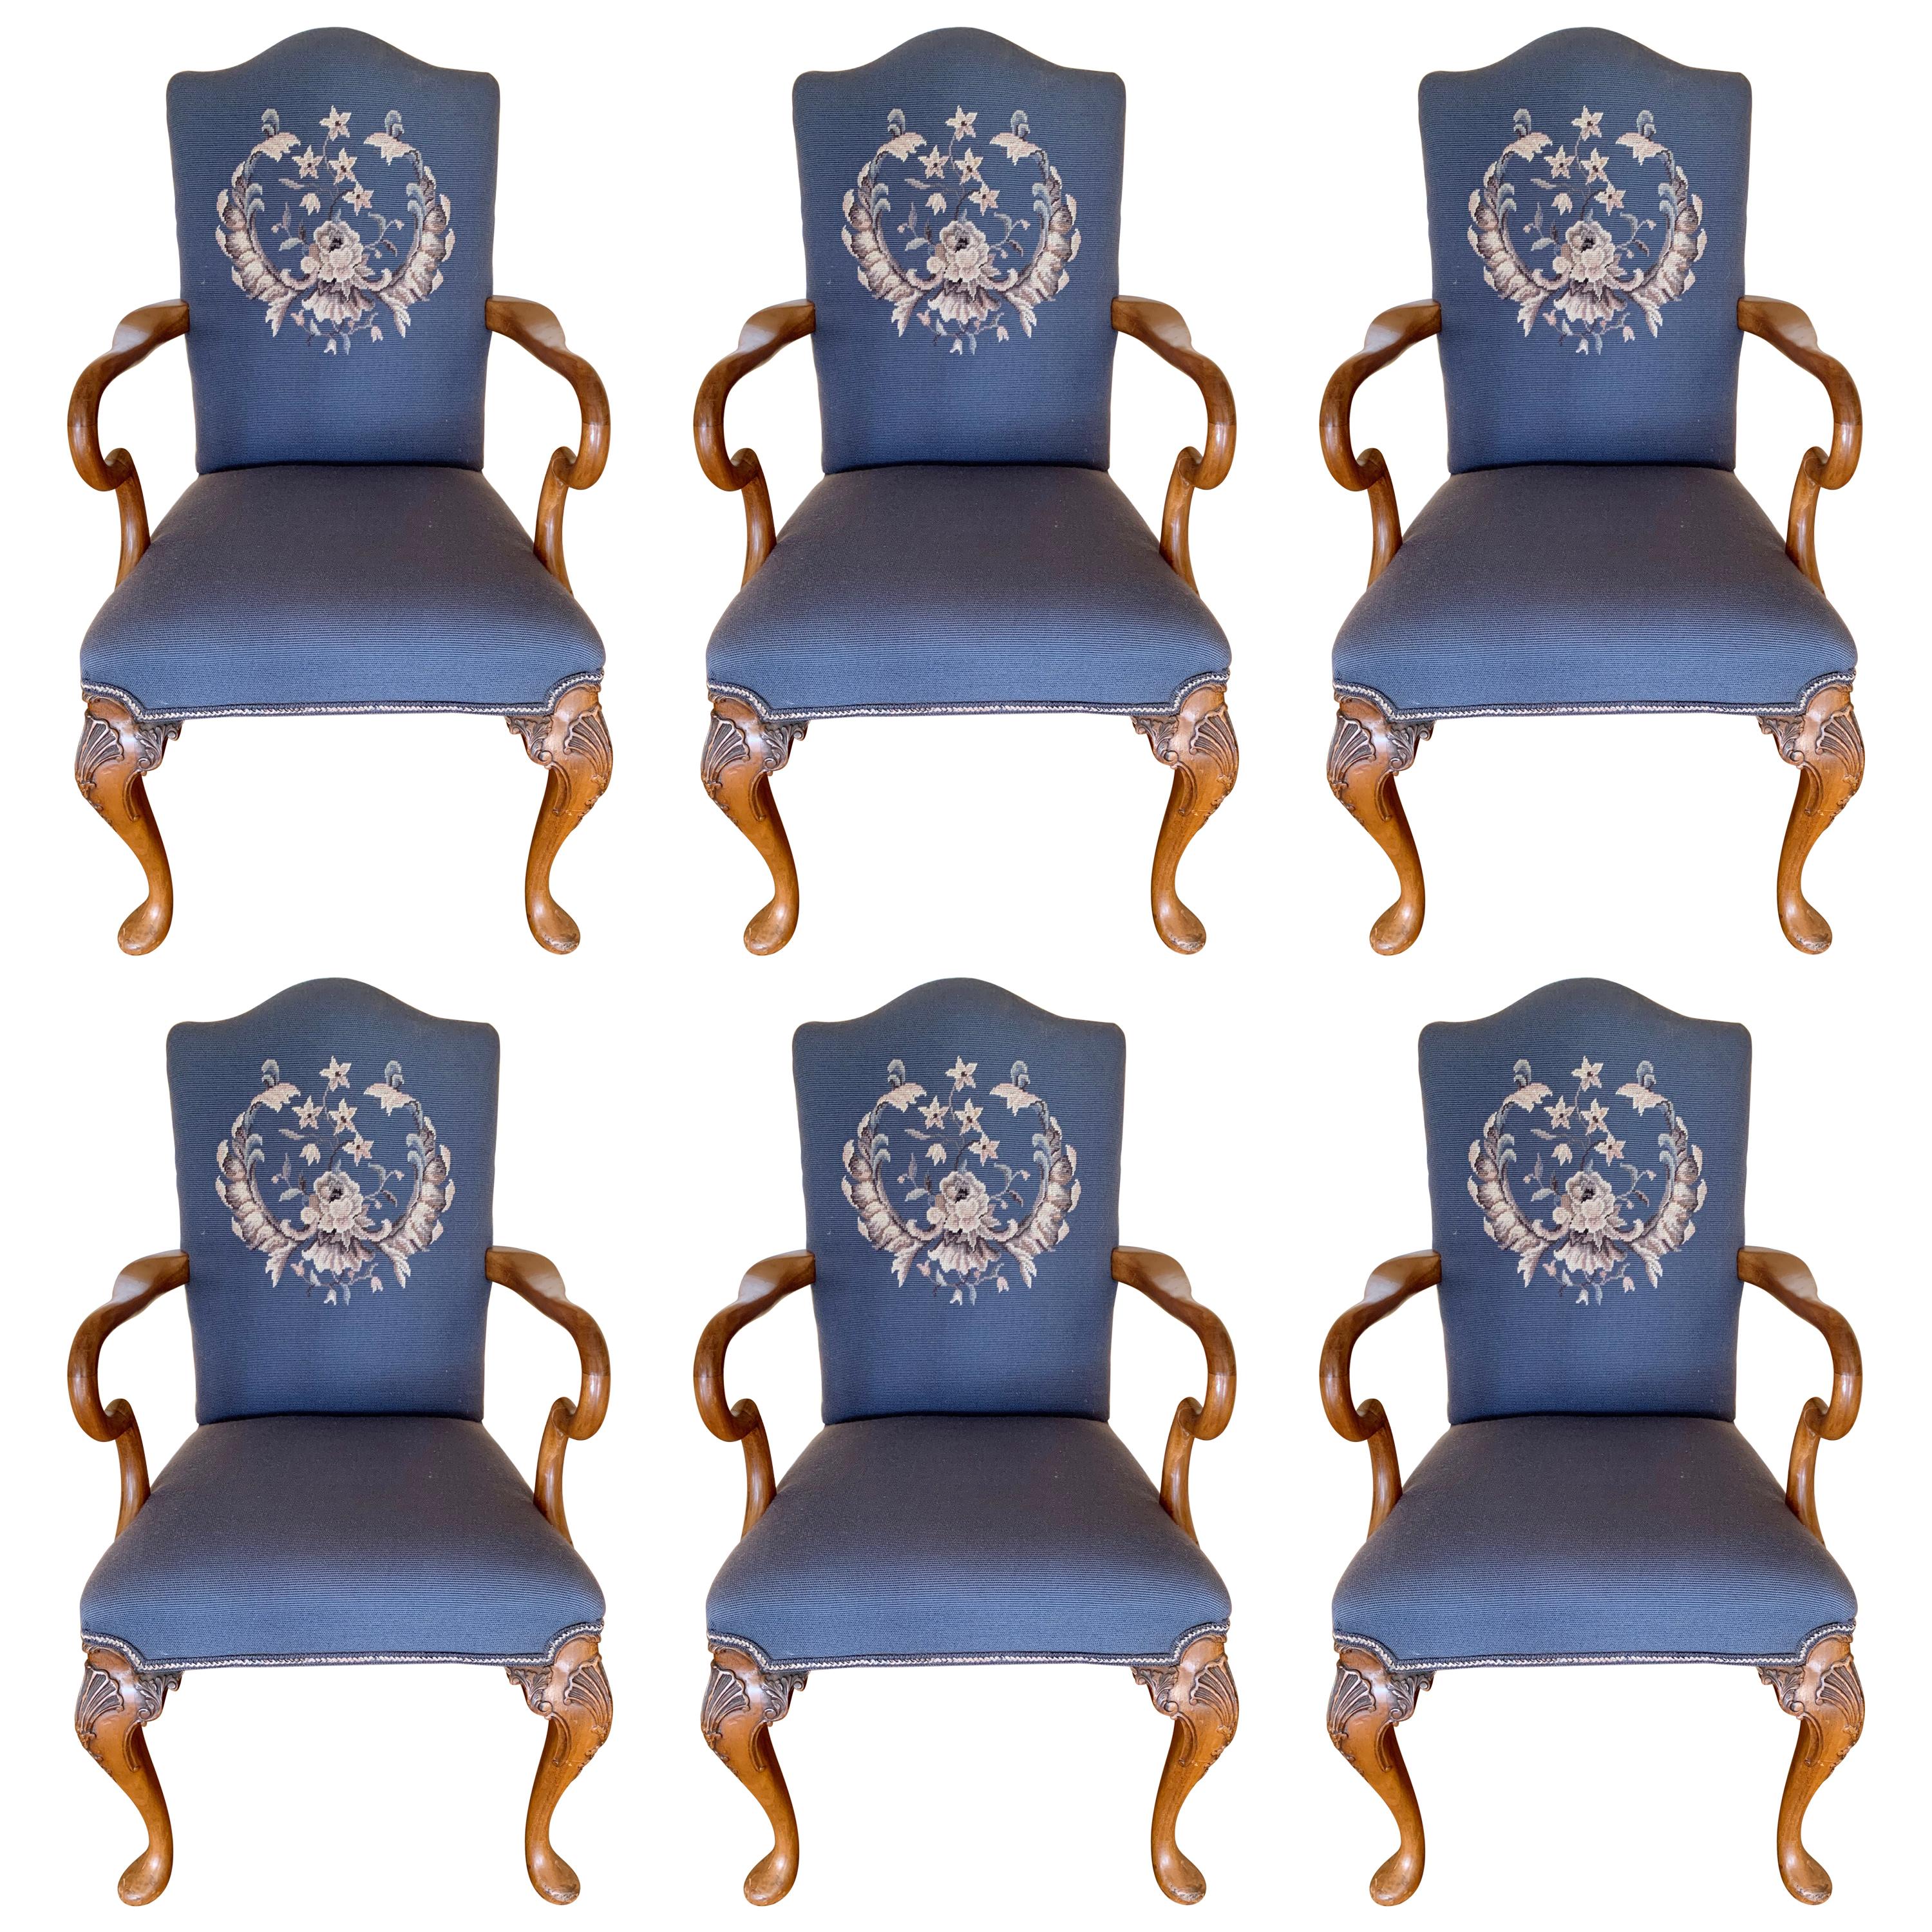 Carved Walnut Embroidered Needlepoint Dining Chairs, Set of 6